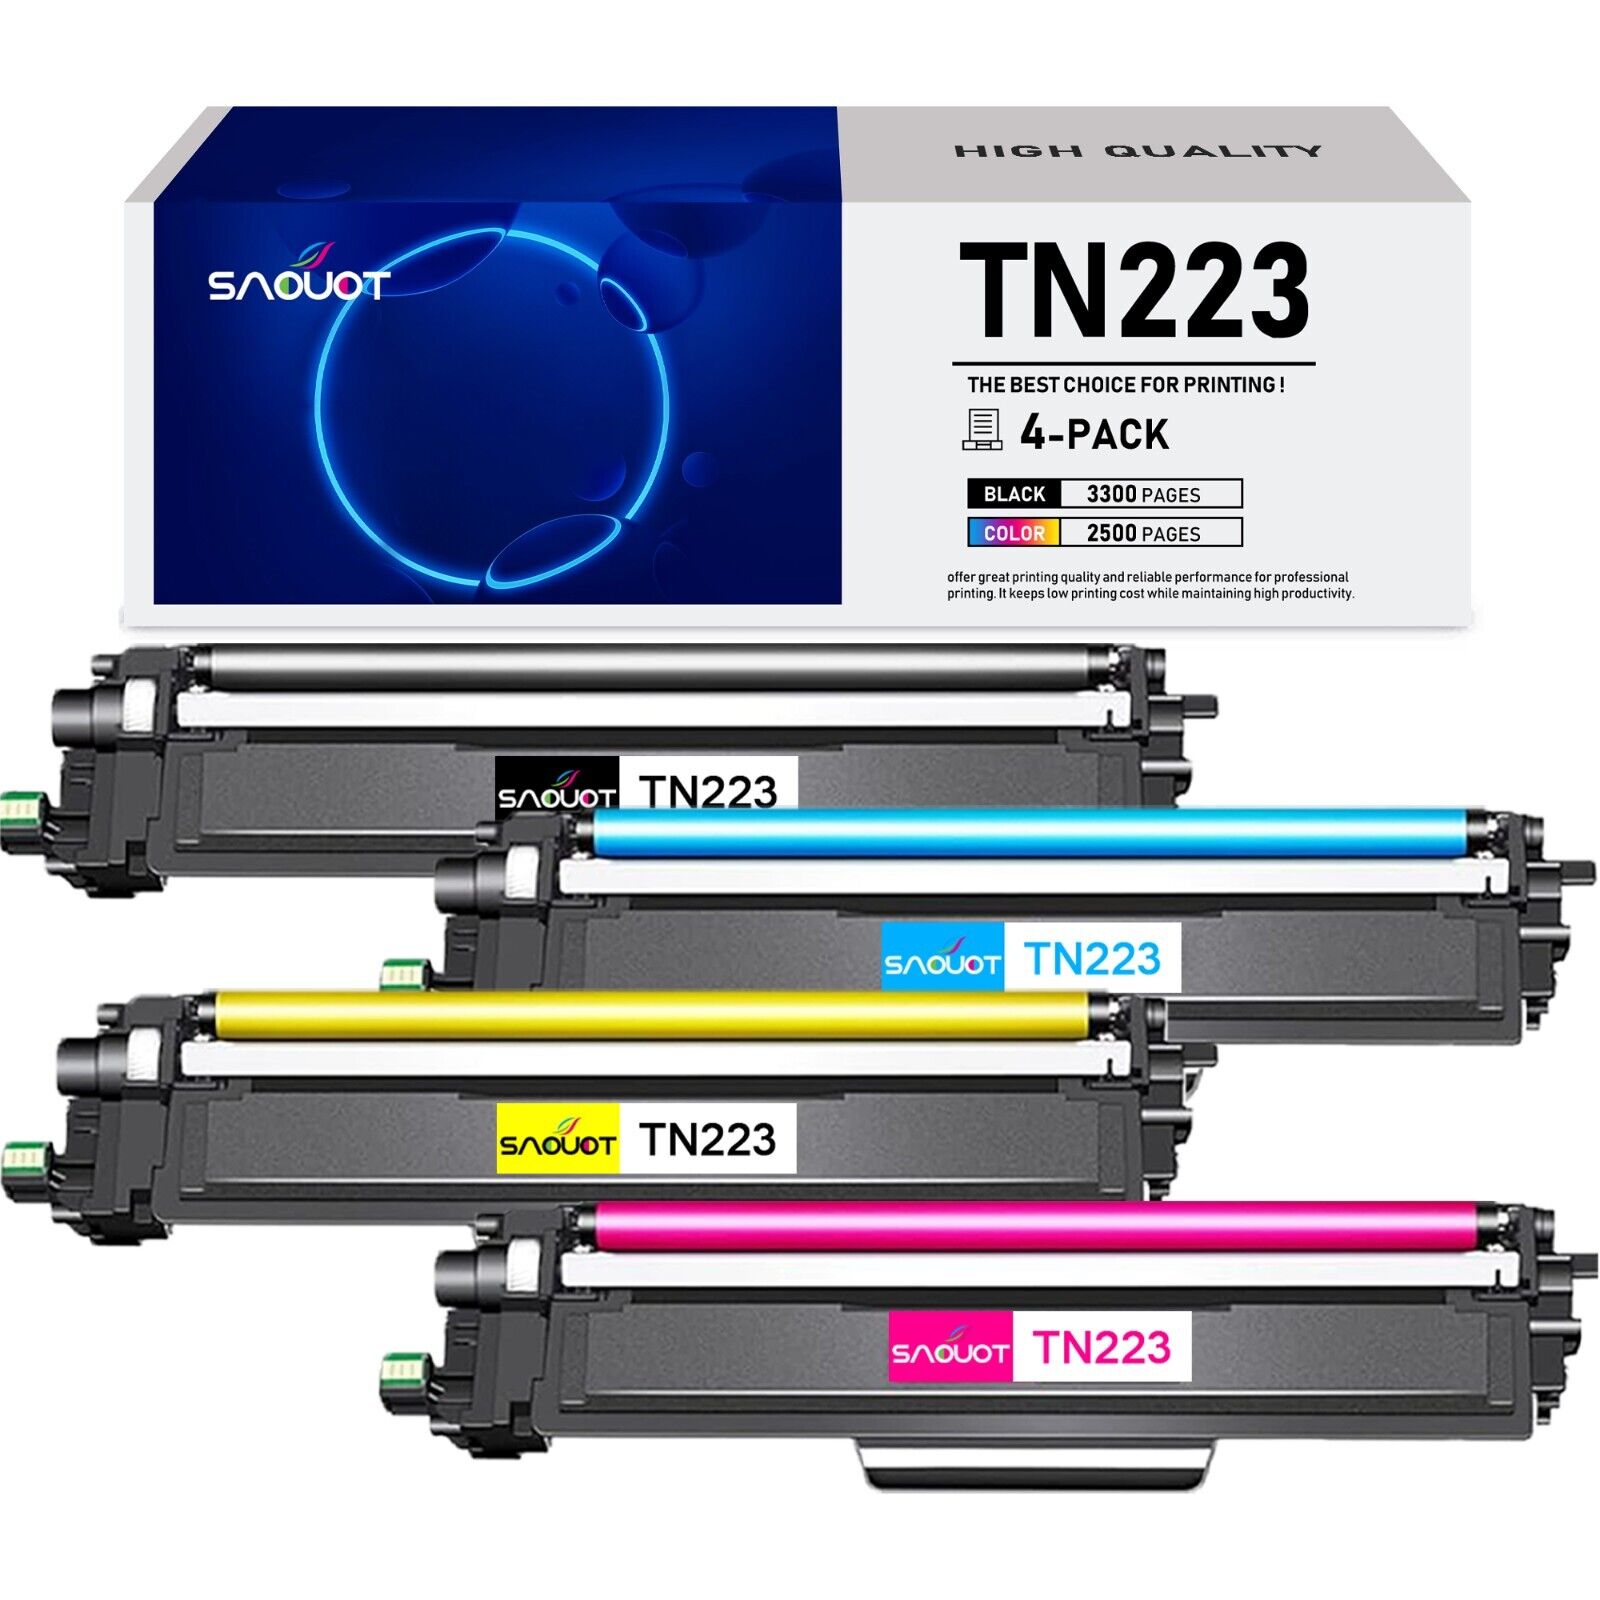 TN223 Toner Cartridge Replacement for Brother MFC-L3750CDW HL-L3290CDW L3210CW